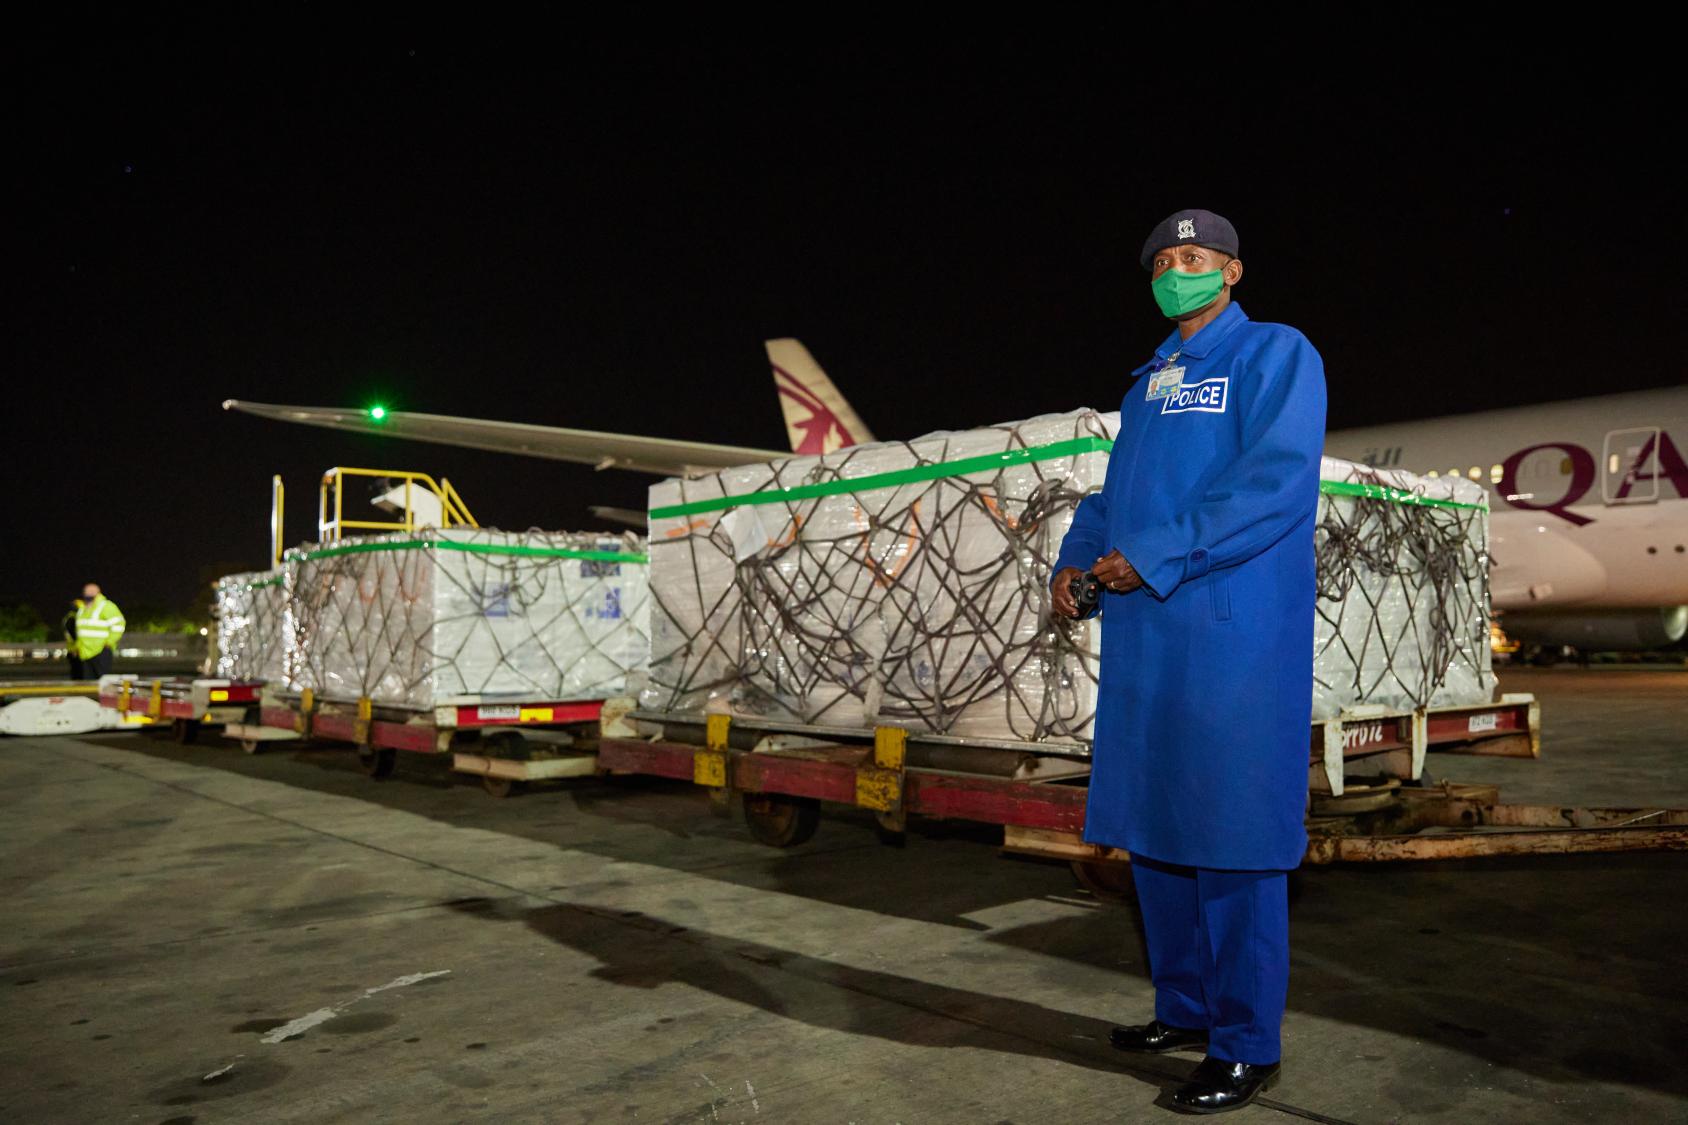 A man dressed in a blue police uniform stands next to a large delivery of vaccines with an airplane in the background.